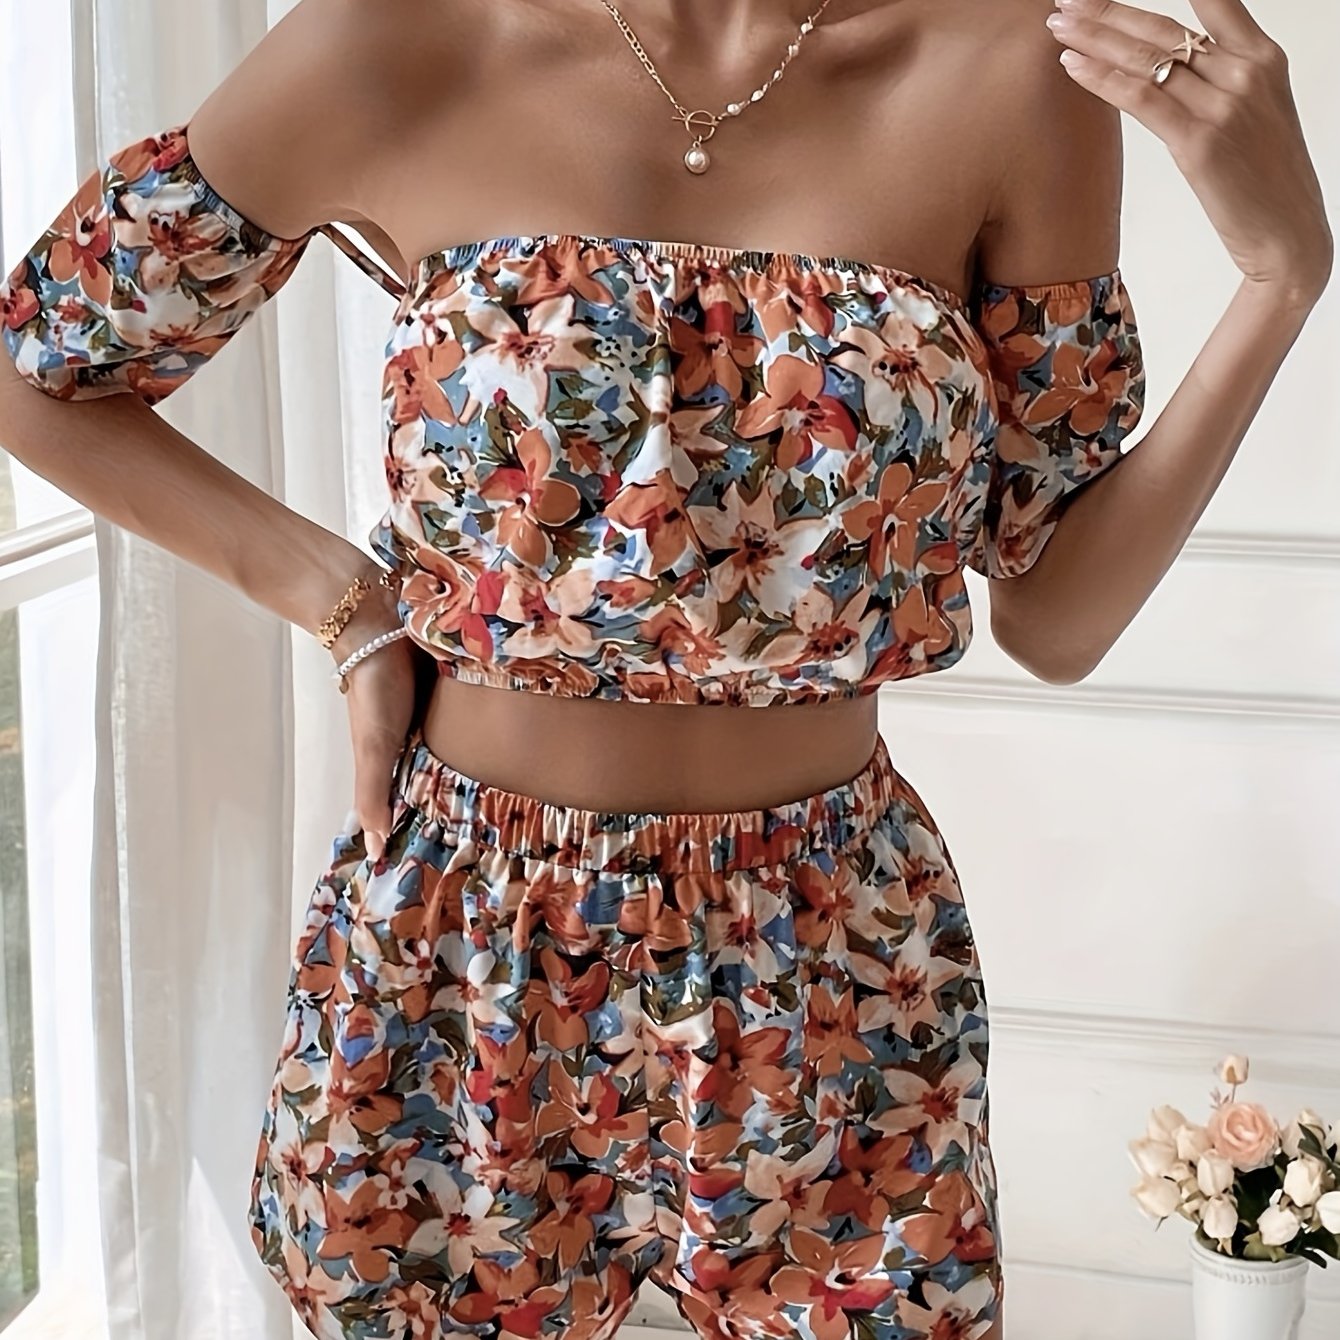 Floral Print Boho Ruffle Crop Top And Plus Size Shorts Set For Women Plus  Size Summer Beach Cover Up From Luote, $25.33